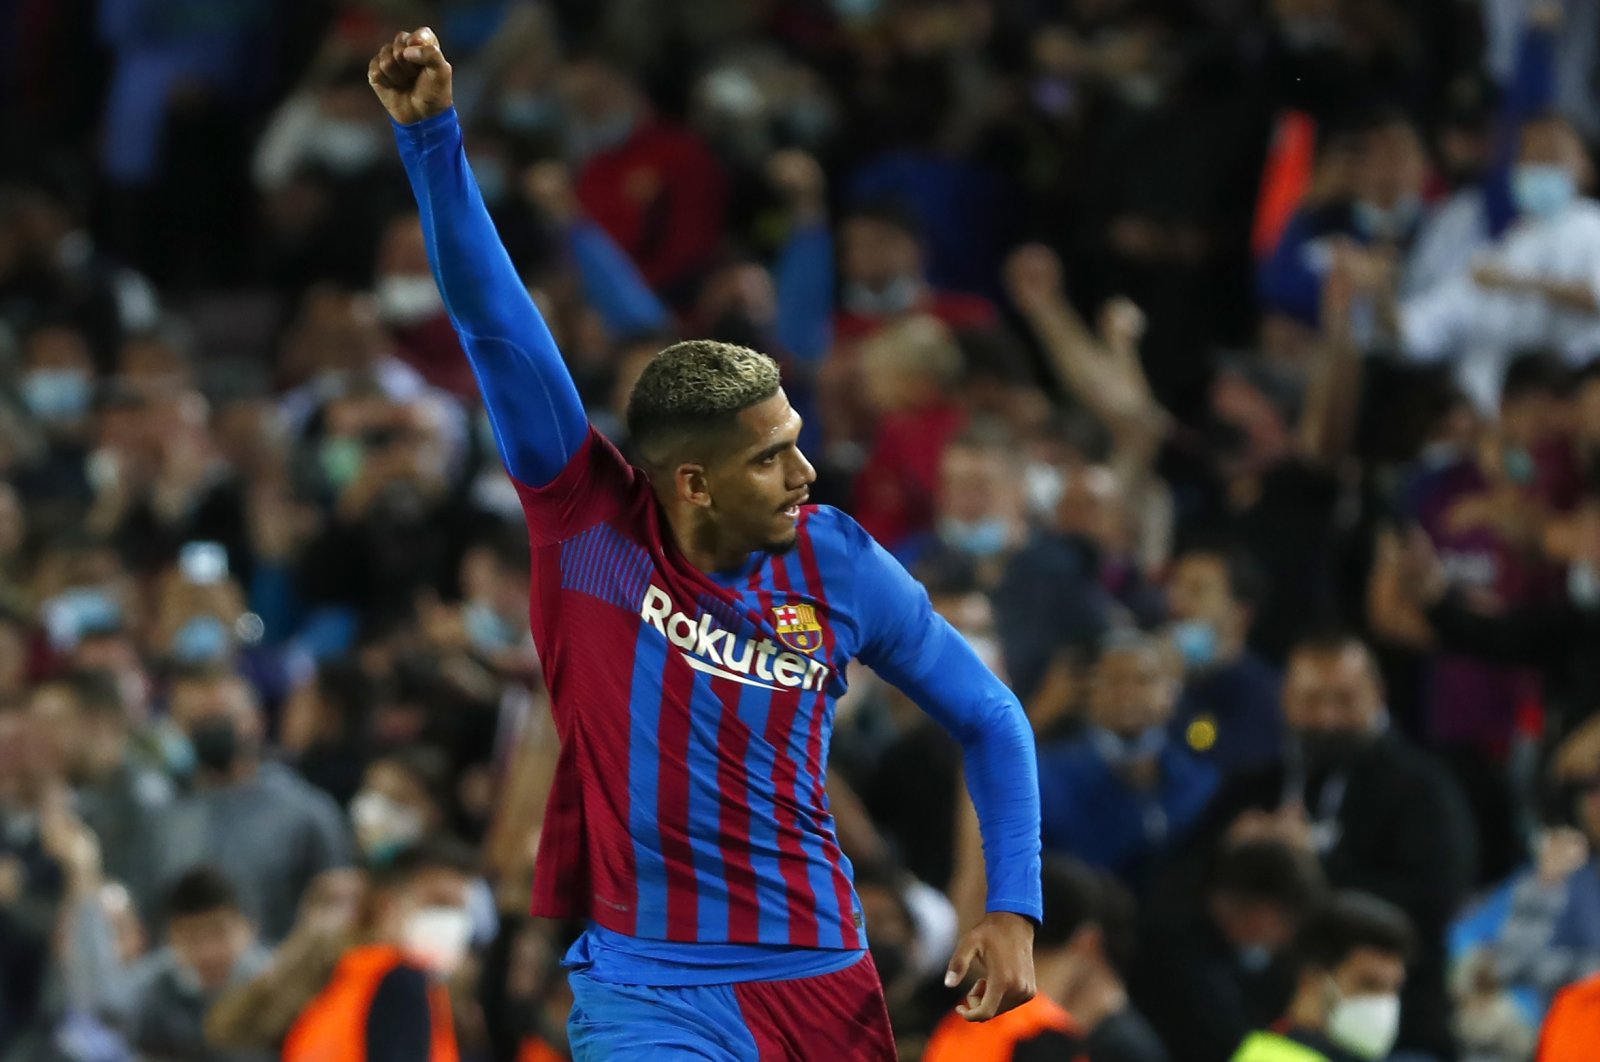 Barcelona's Ronald Araujo celebrates after scoring his side's first goal during the Spanish La Liga soccer match between Barcelona and Granada, at the Camp Nou stadium in Barcelona, Spain, Monday, Sept. 20, 2021. (AP Photo)